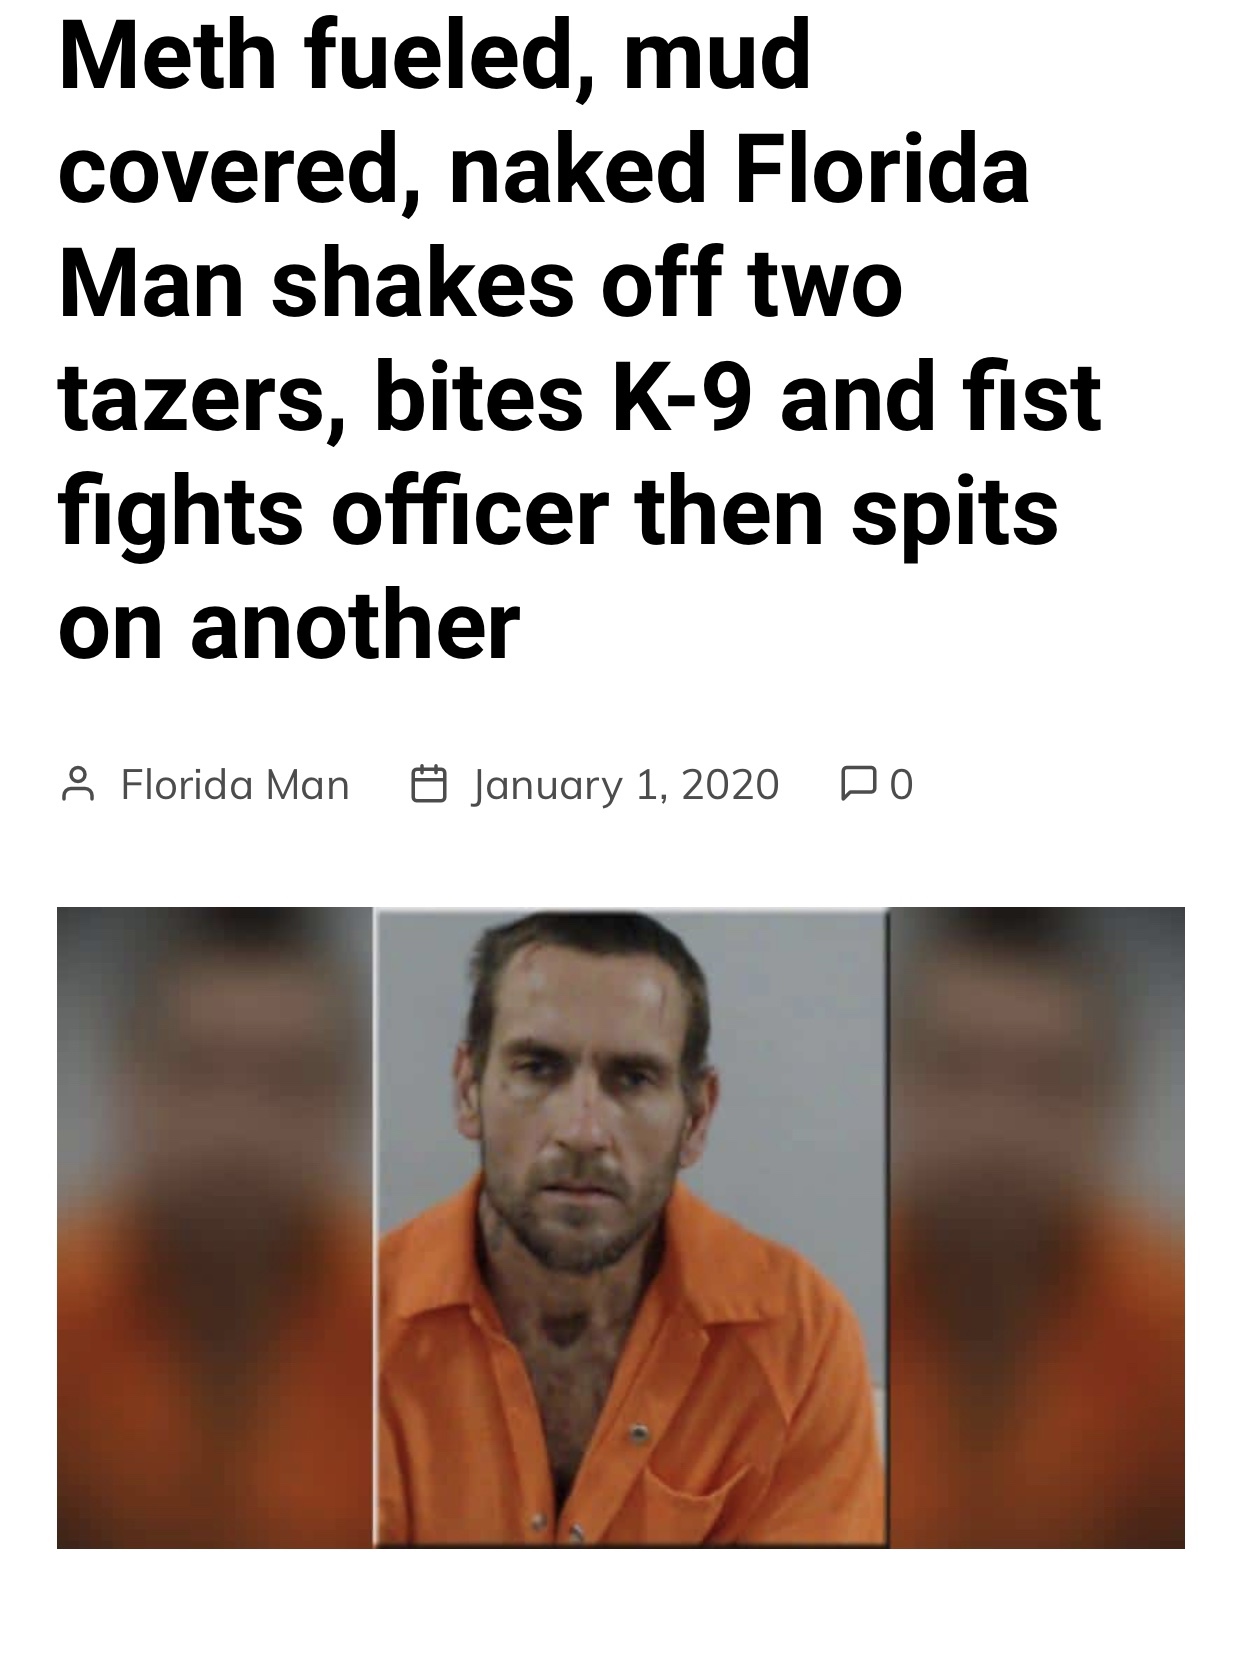 nieuwsflits - Meth fueled, mud covered, naked Florida Man shakes off two tazers, bites K9 and fist fights officer then spits on another Florida Man Do